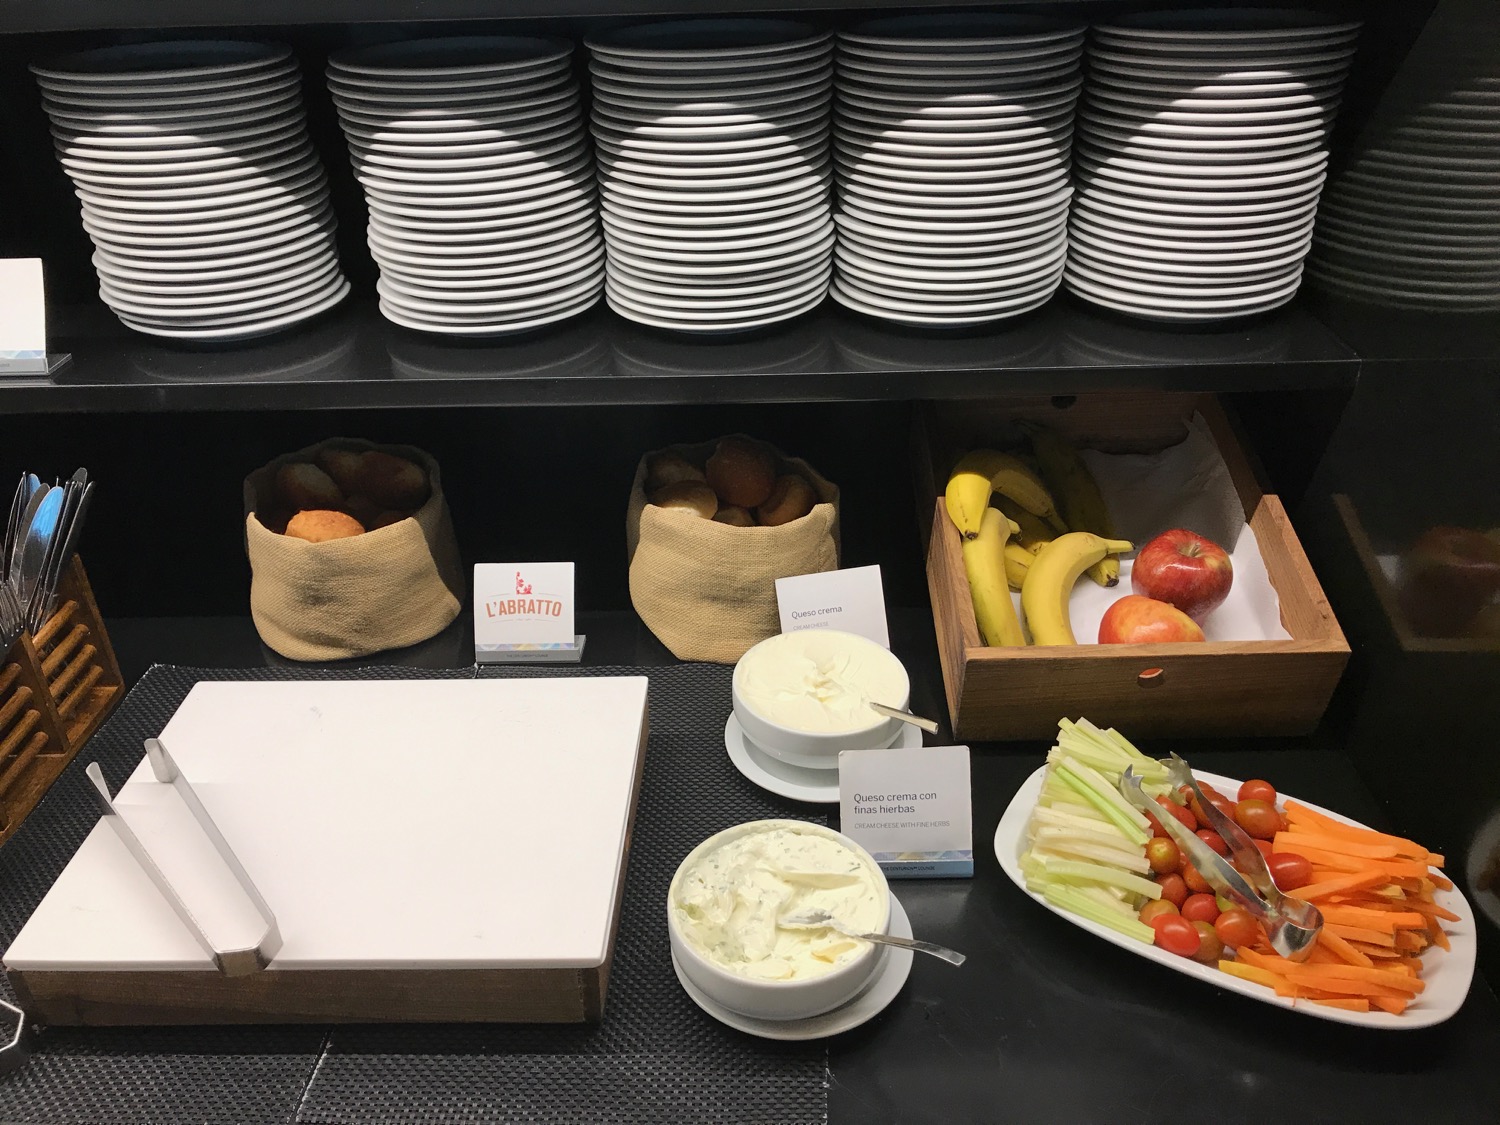 a shelf with plates and food on it